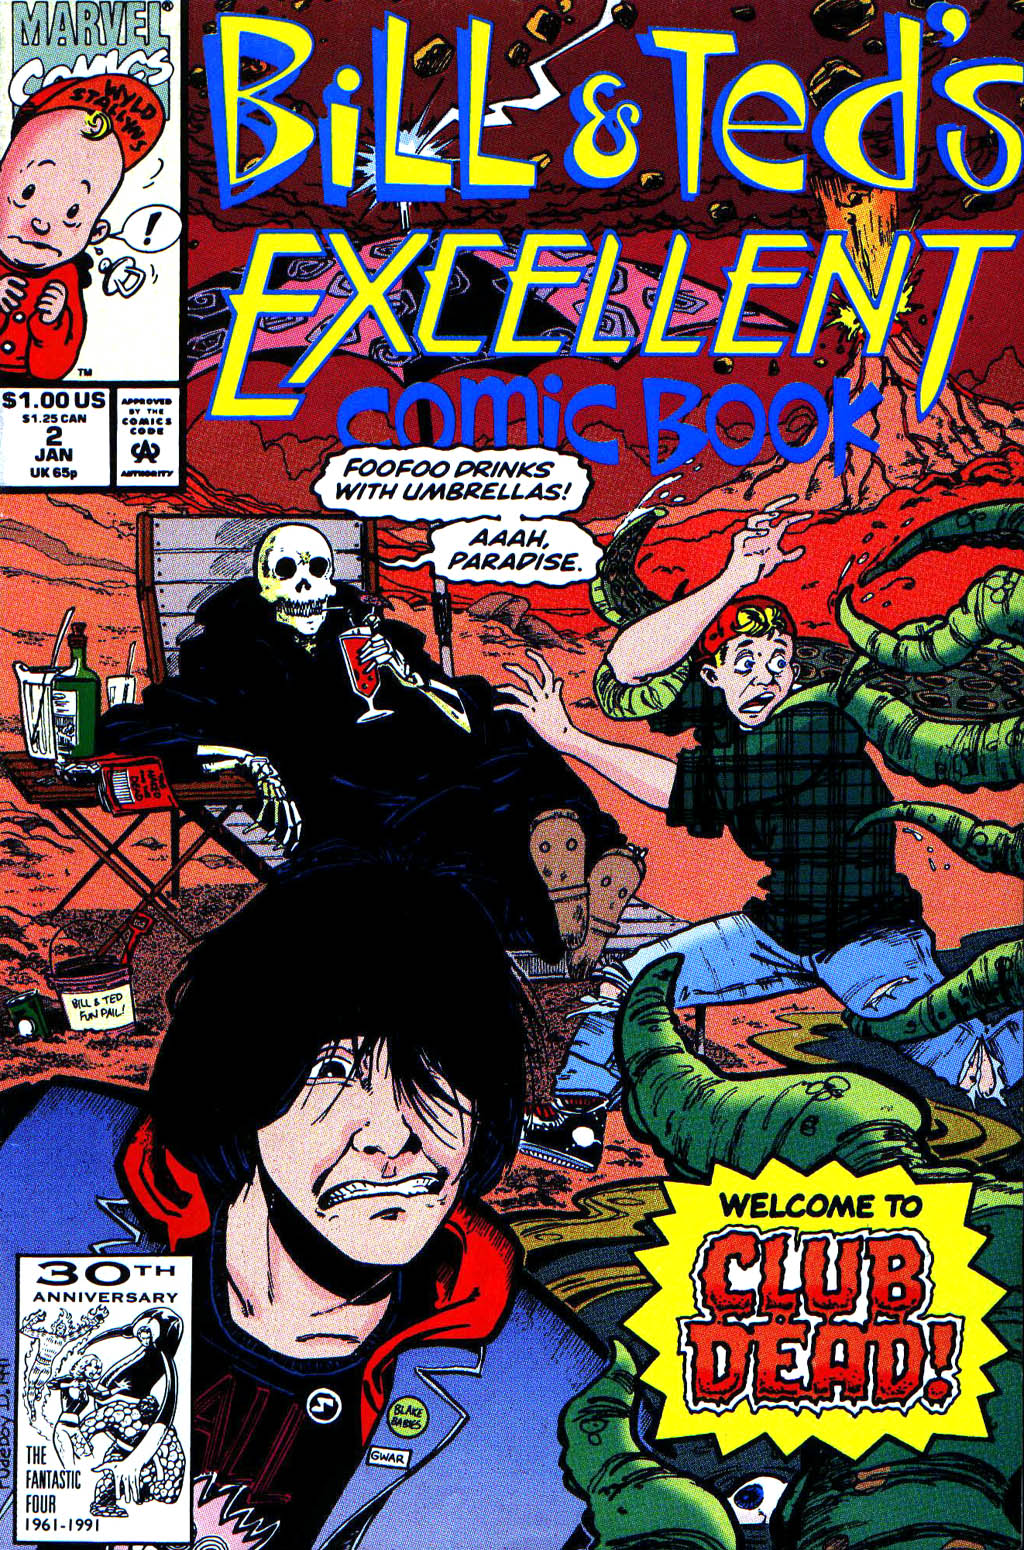 Read online Bill & Ted's Excellent Comic Book comic -  Issue #2 - 1